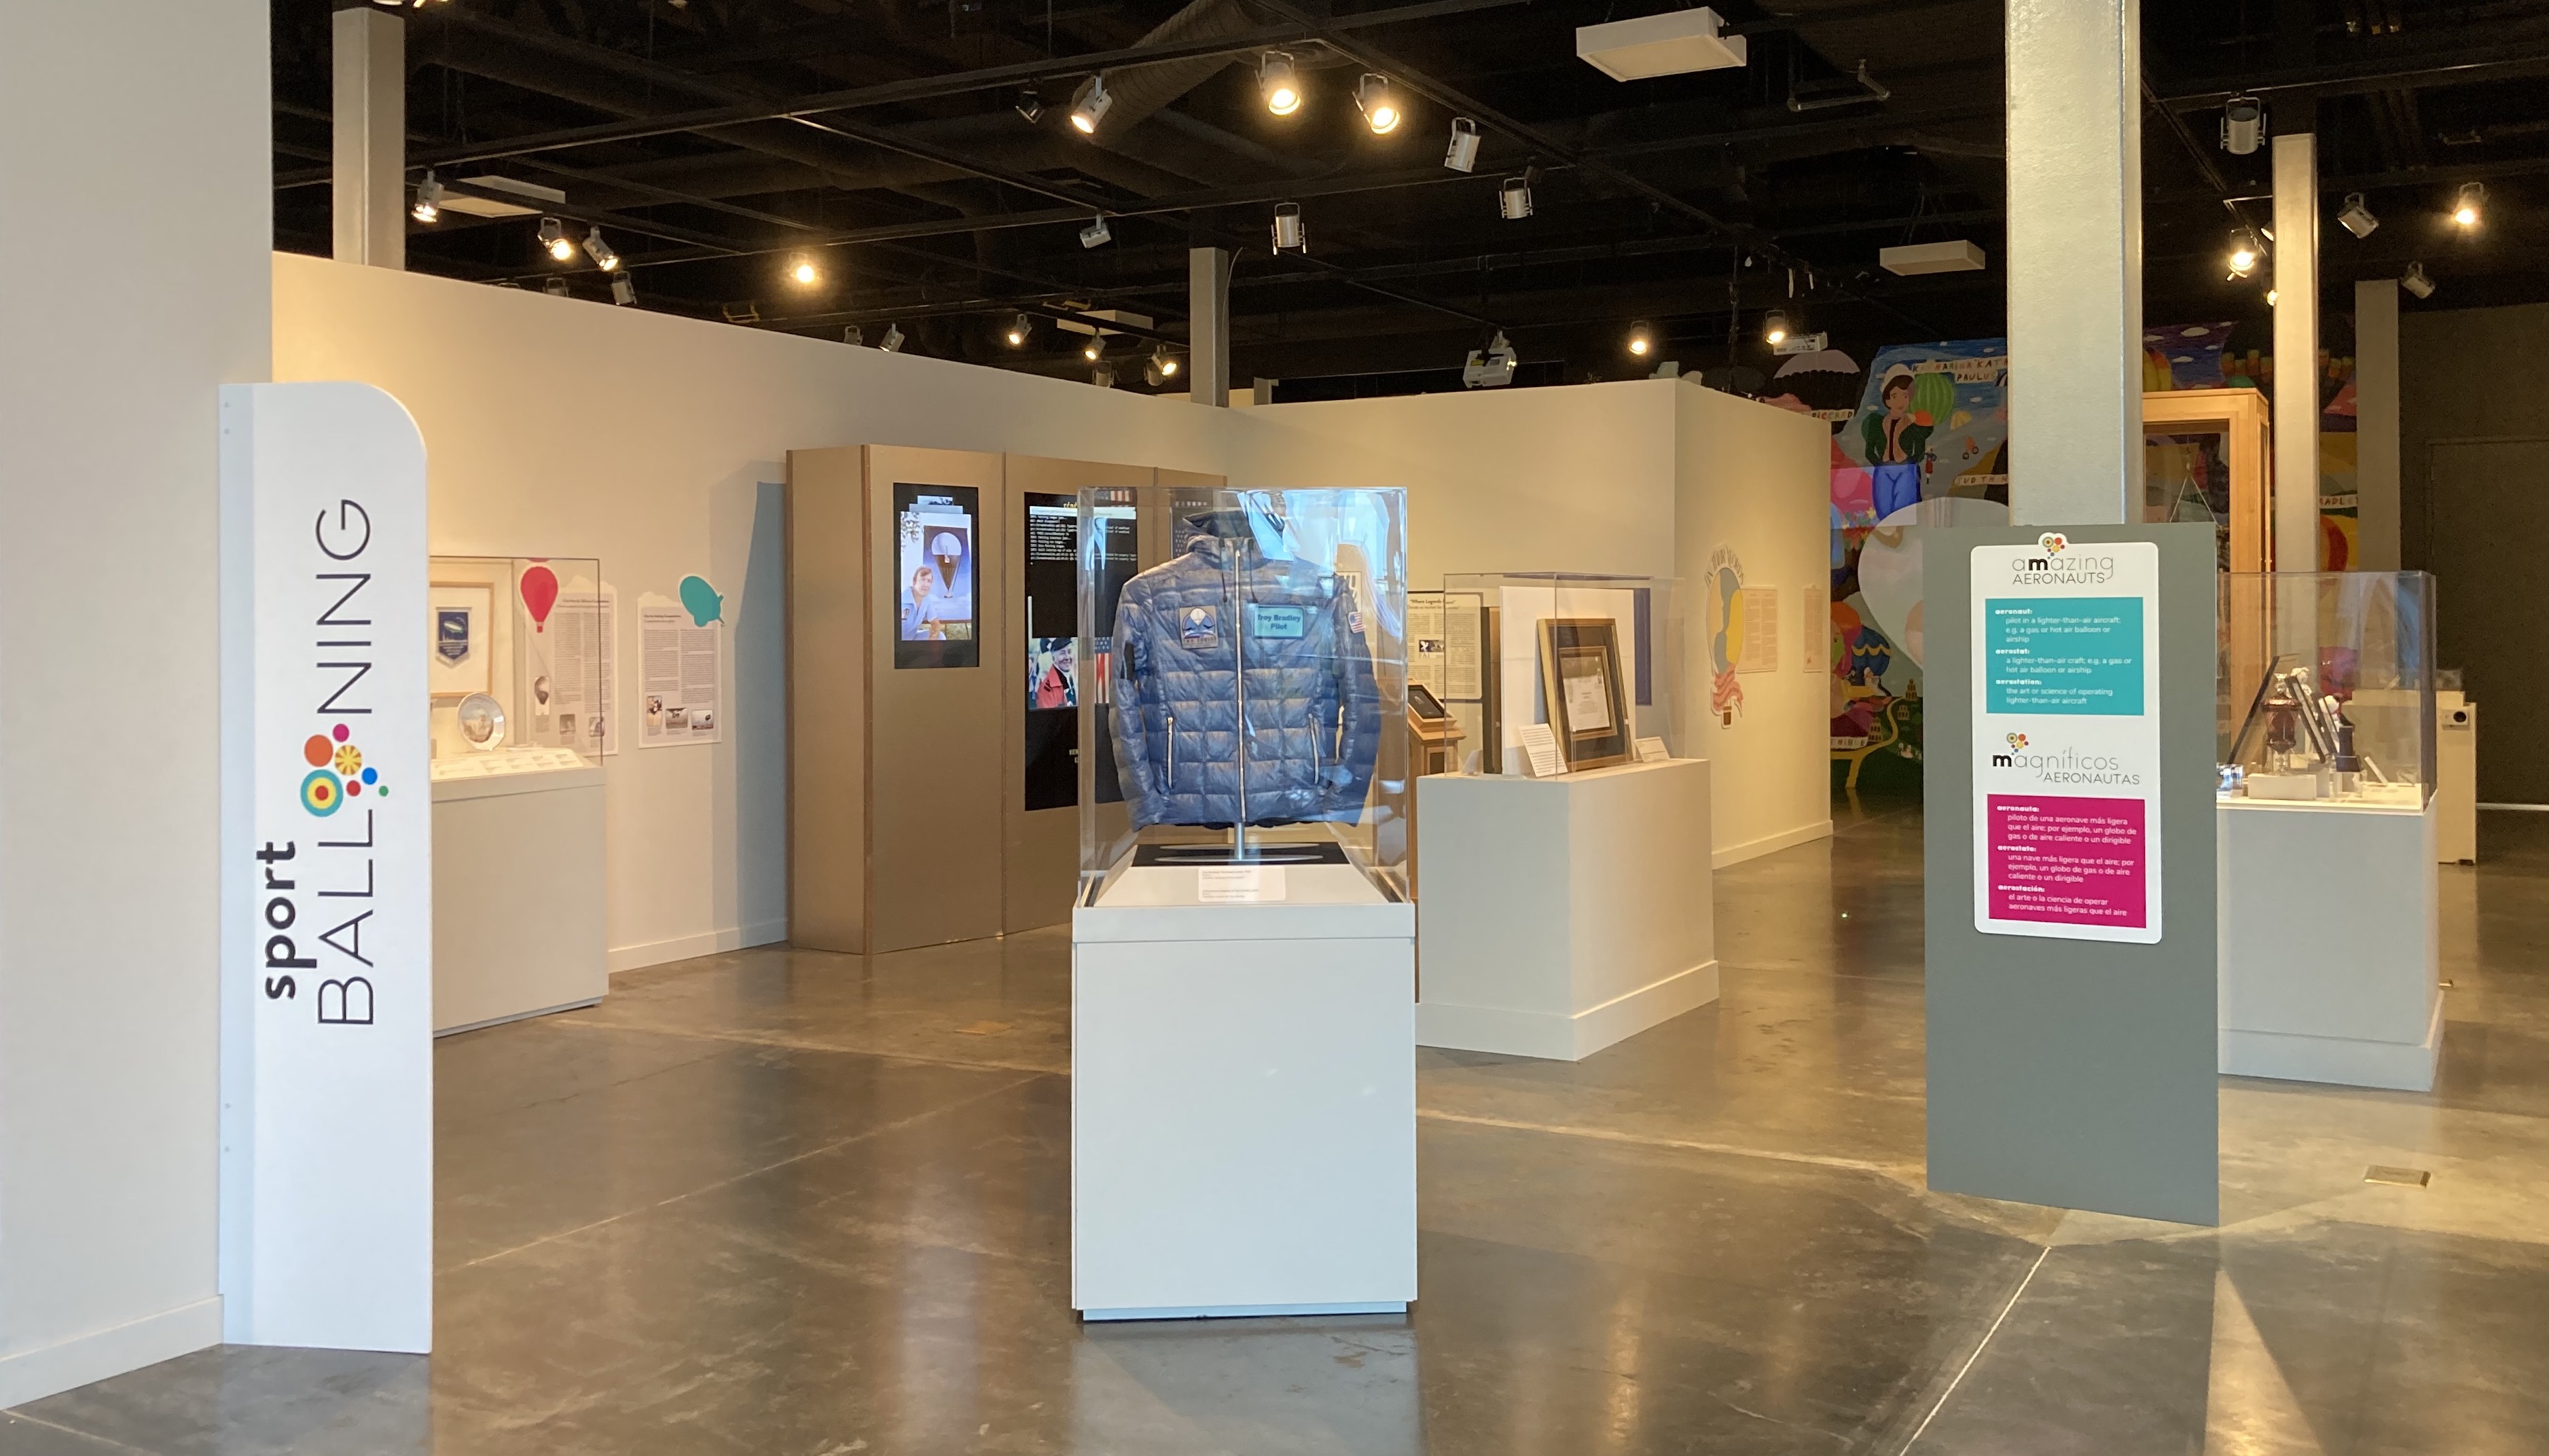 A view of several exhibits within the Sport Ballooning exhibition, including a jacket, various artworks under glass, and several informational displays.